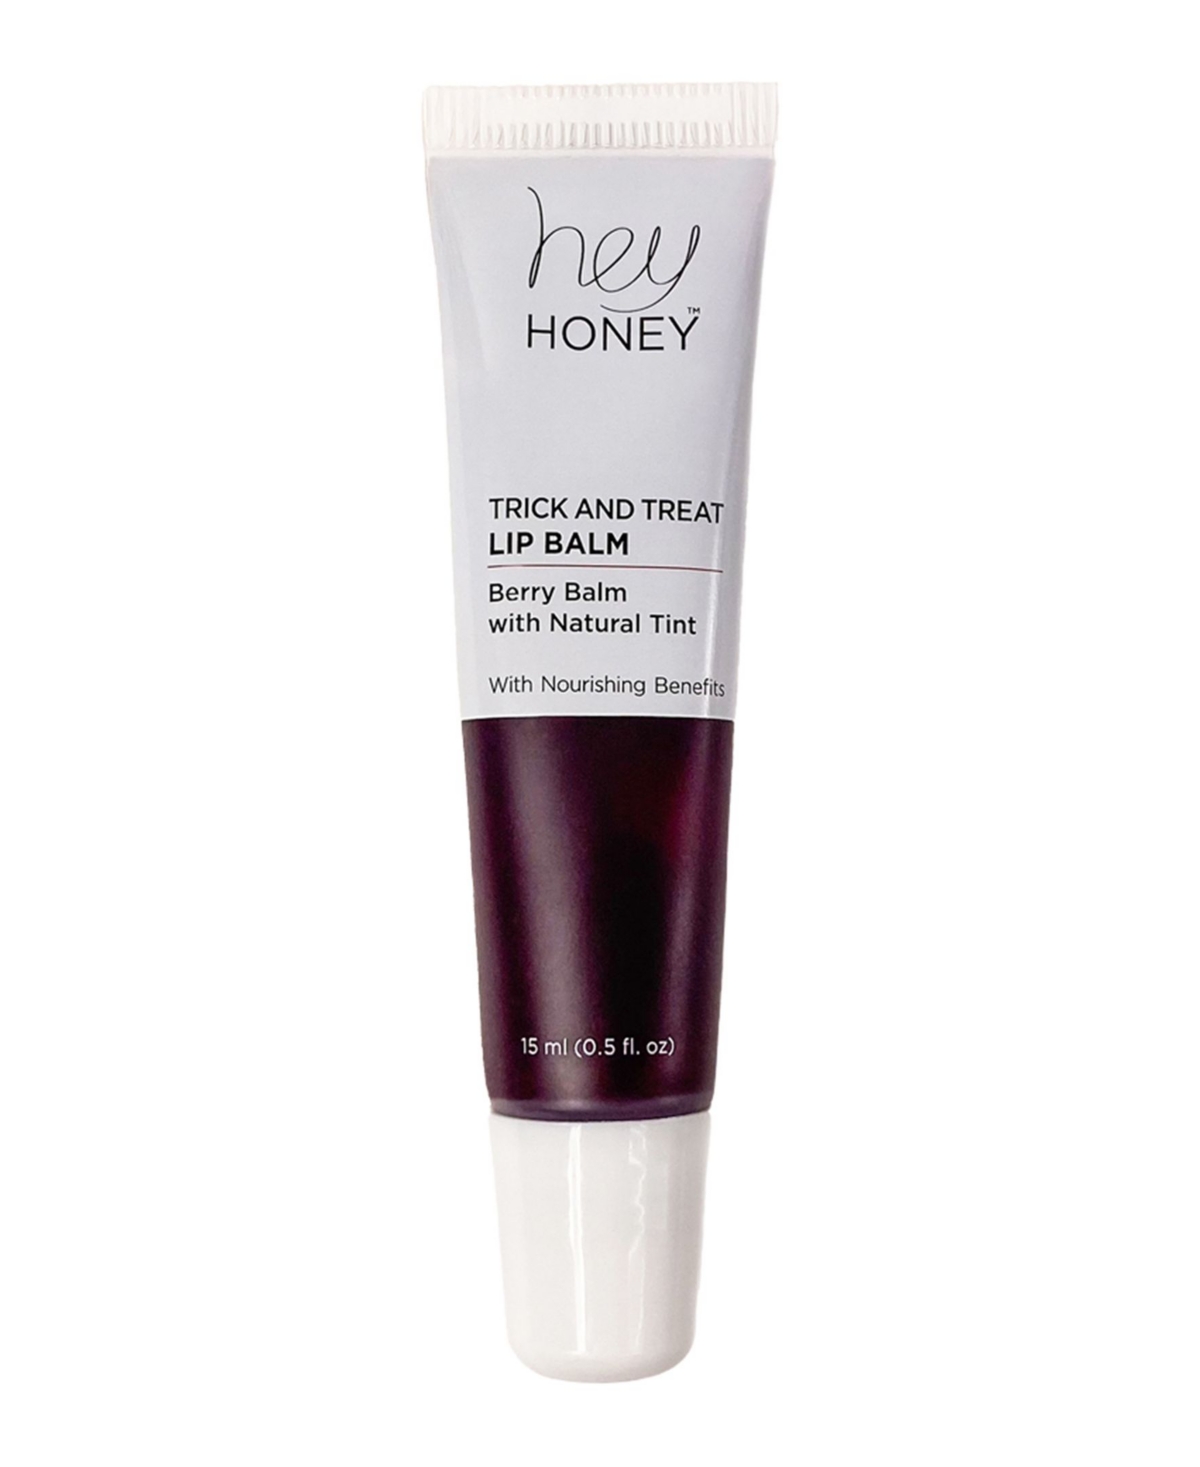 Hey Honey Trick and Treat Lip Balm Berry Balm with Natural Tint, 15 ml